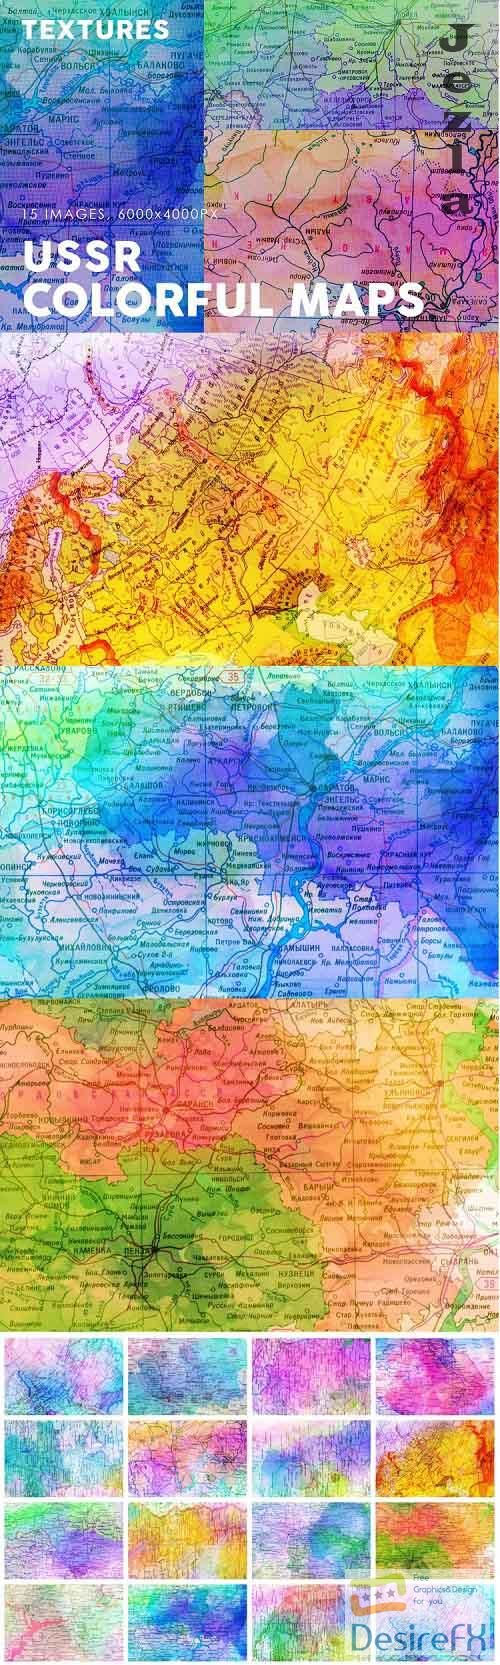 USSR Colorful Map Textures - 728411